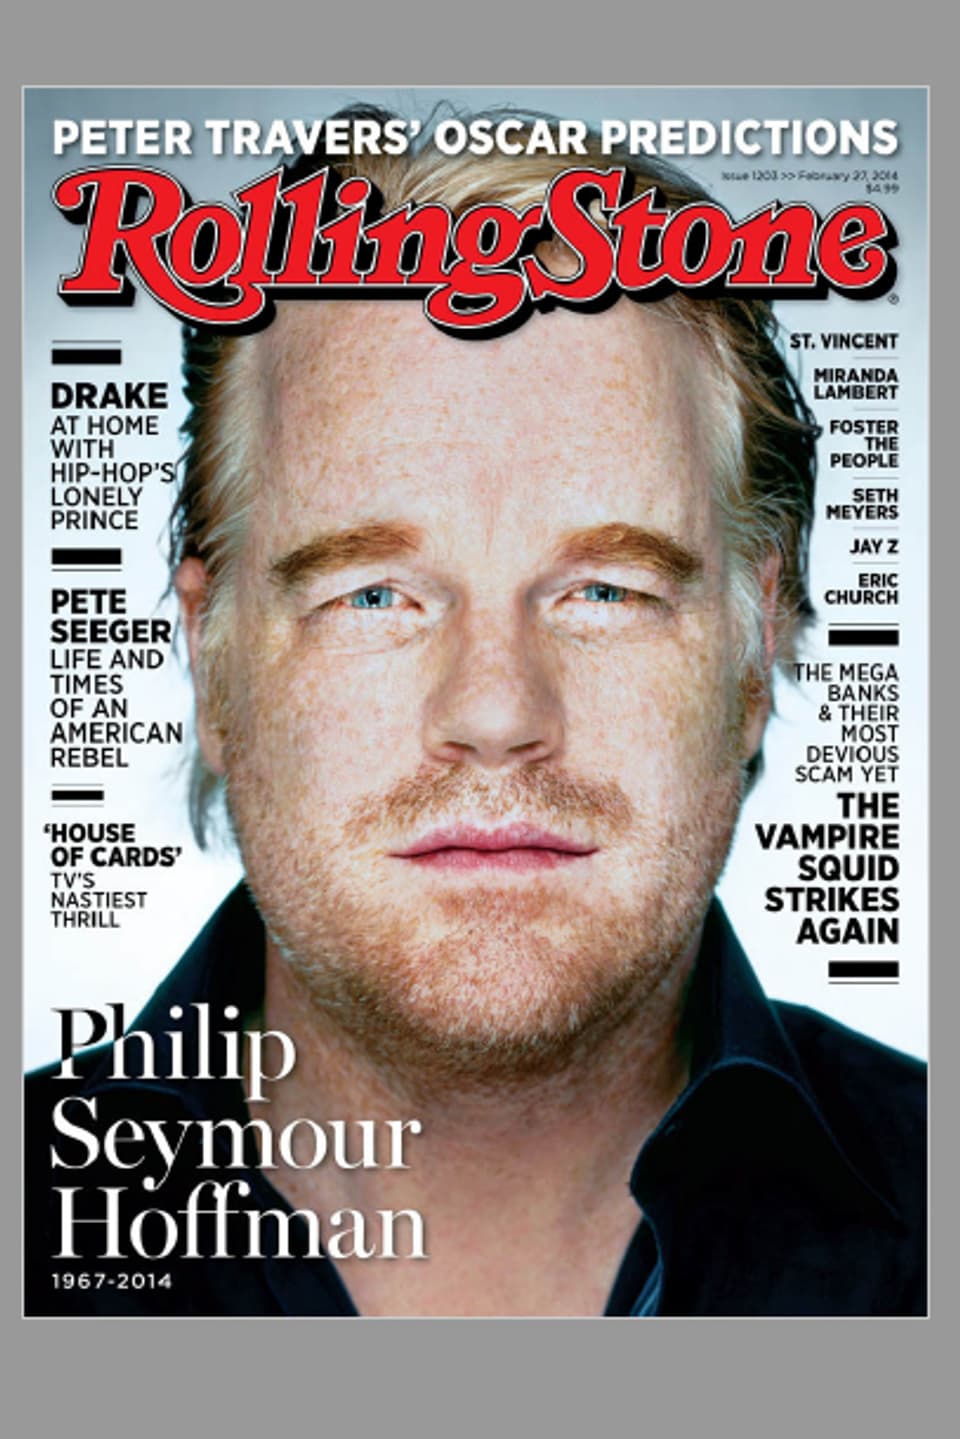 Cover Rolling Stone.